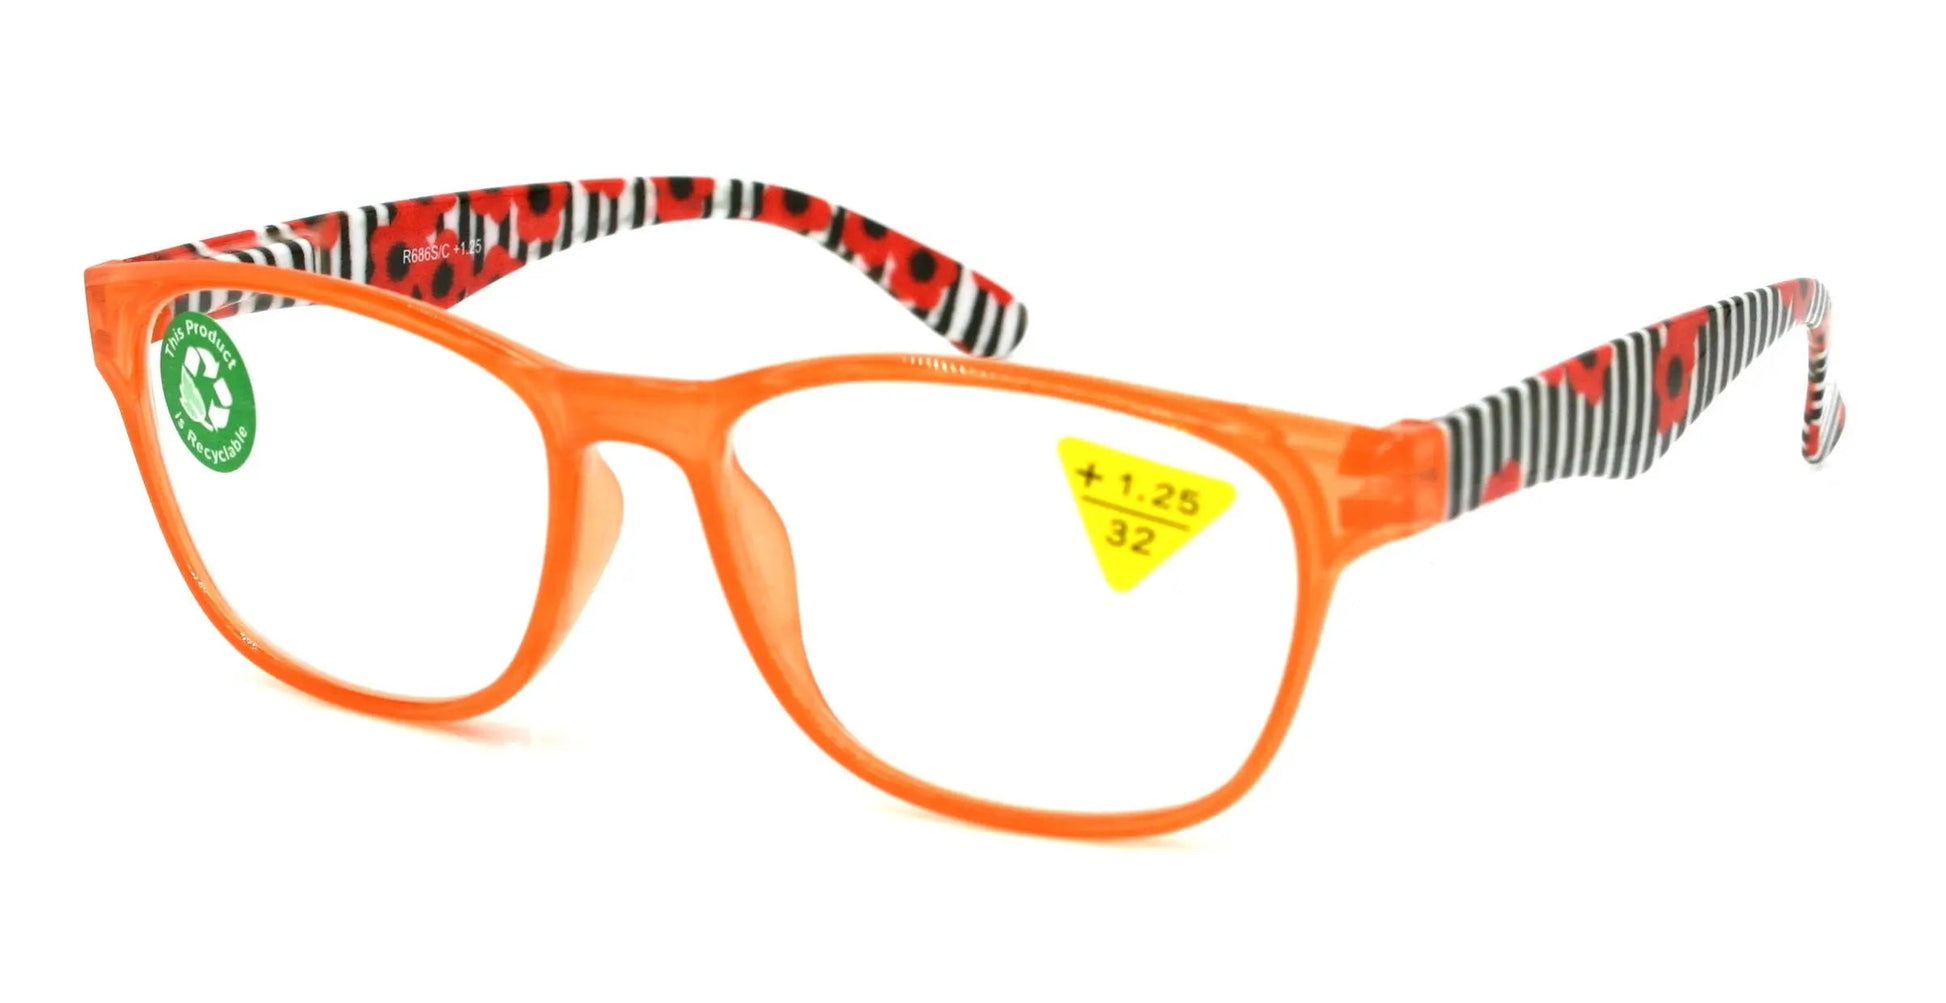 Chelsea, (Premium) Reading Glasses, High End Readers +1.25 to +3 Magnifying Glasses, Square (Orange, Black) Floral Frame, NY Fifth Avenue.